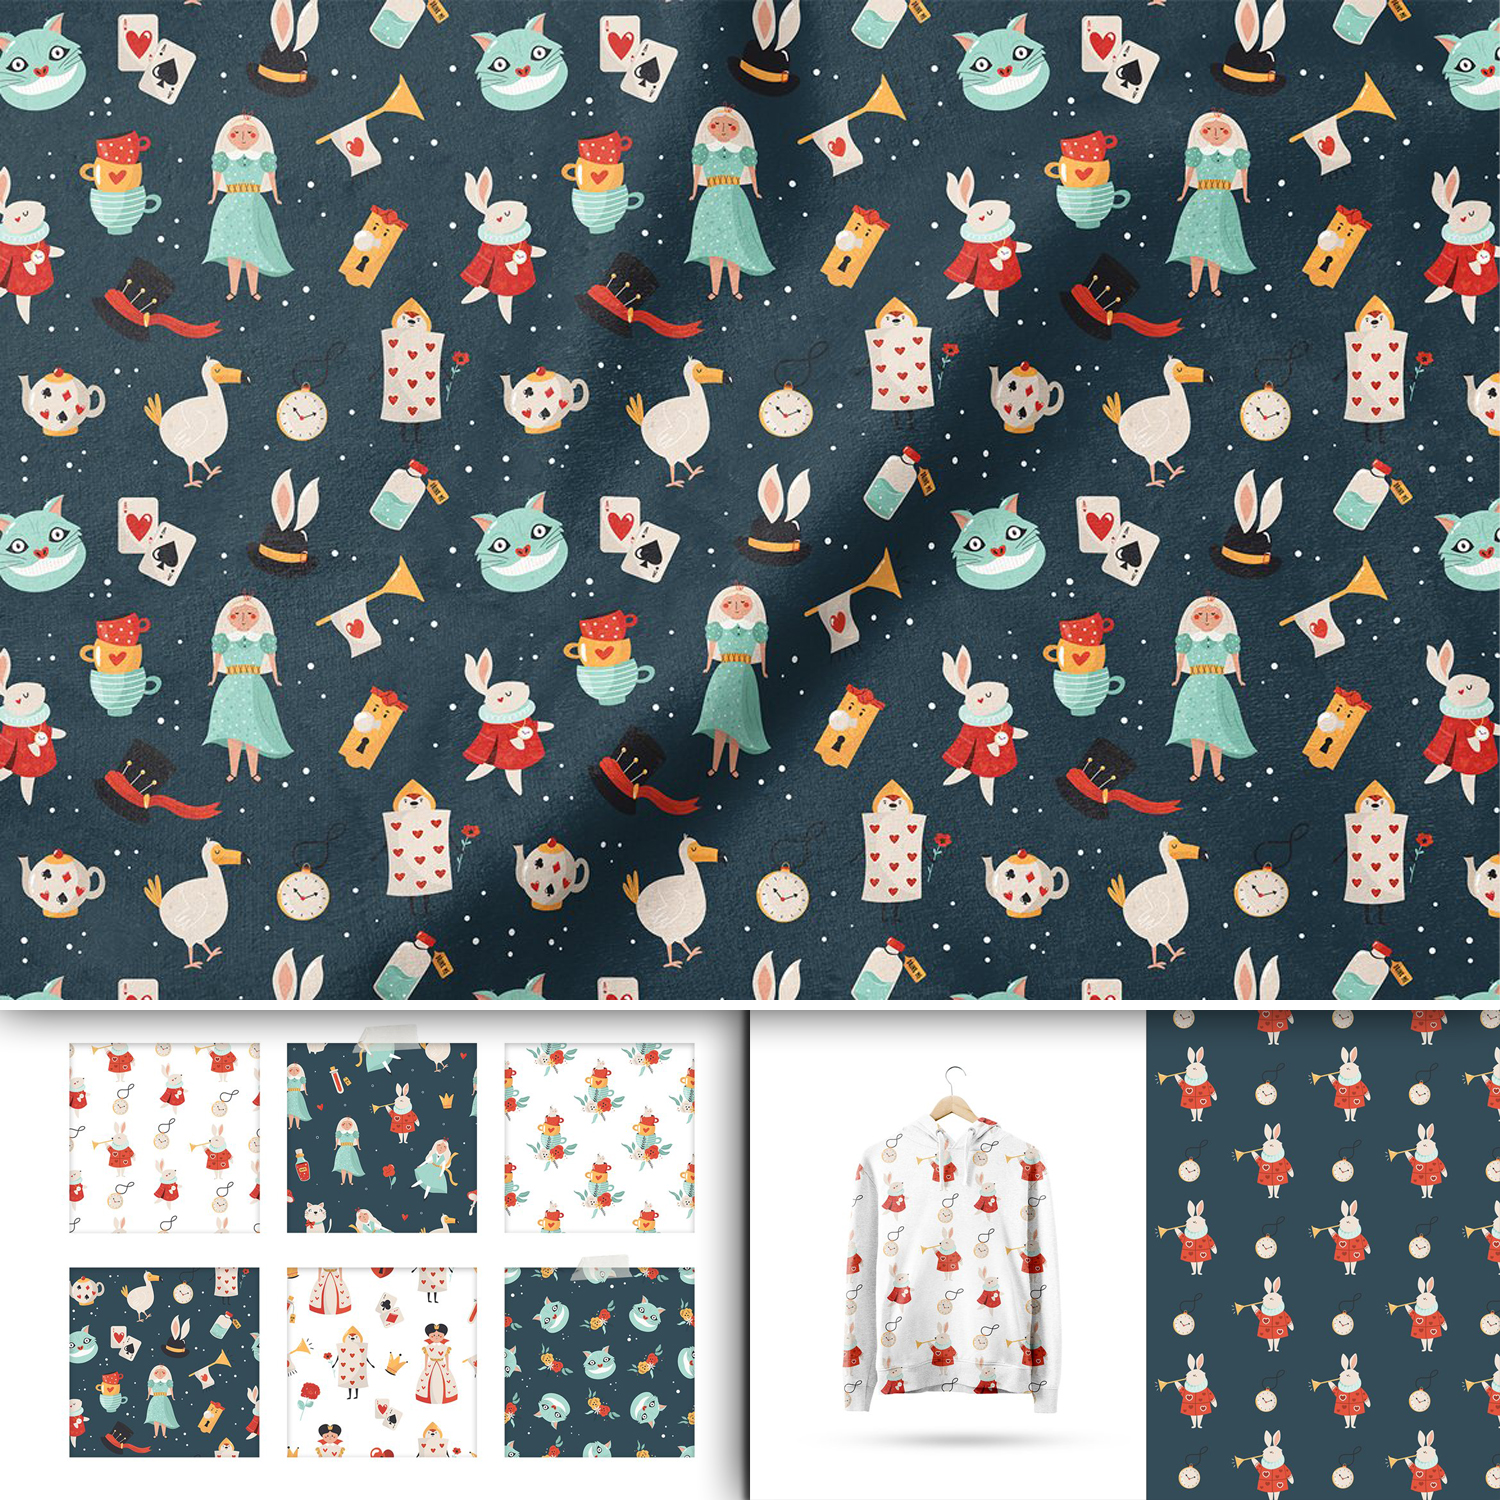 Preview alice in wonderland set of seamless patterns.